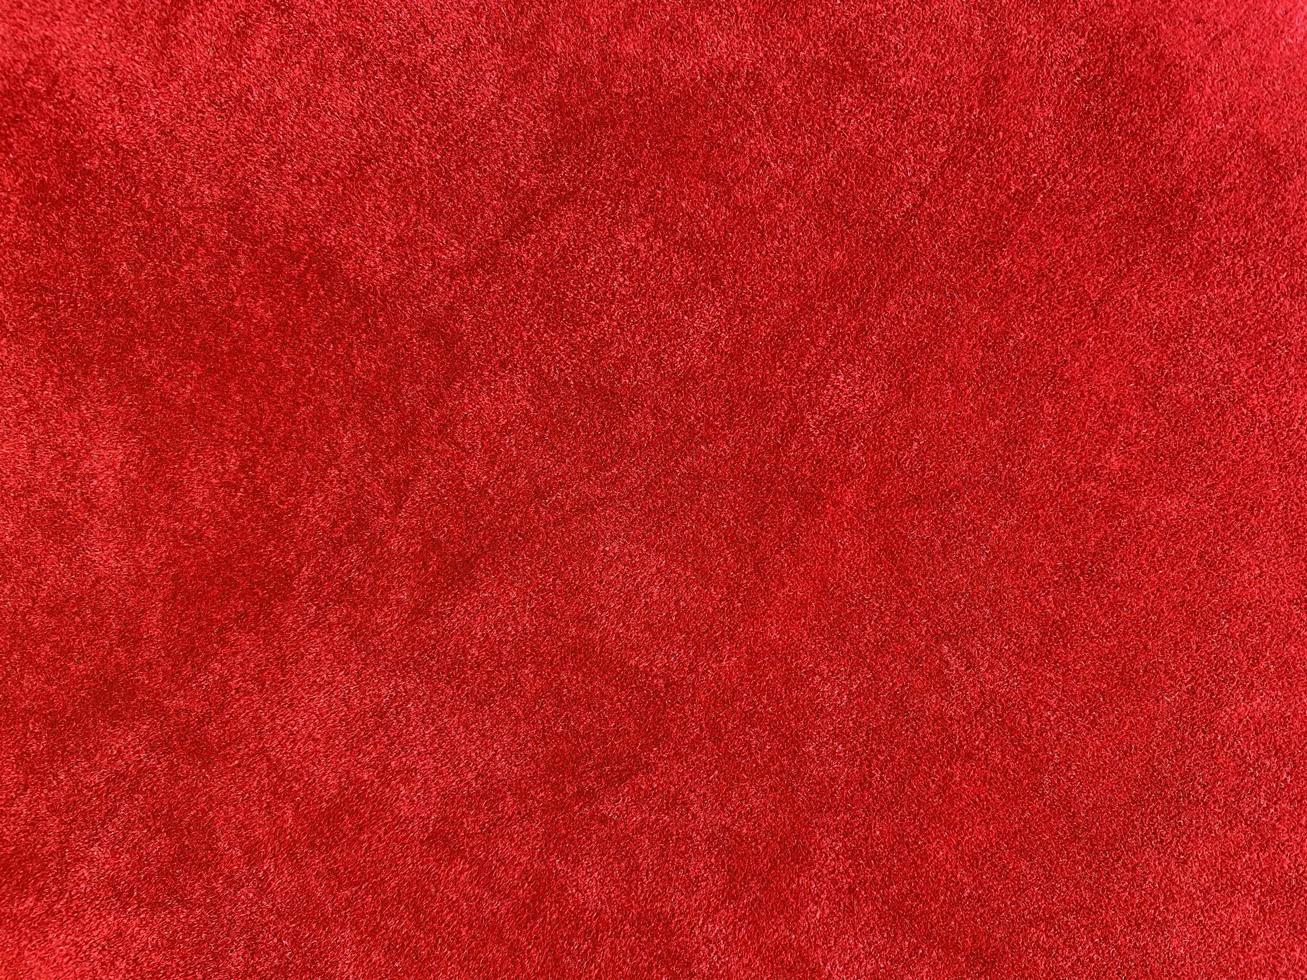 Dark red velvet fabric texture used as background. Empty dark red fabric background of soft and smooth textile material. There is space for text.. photo